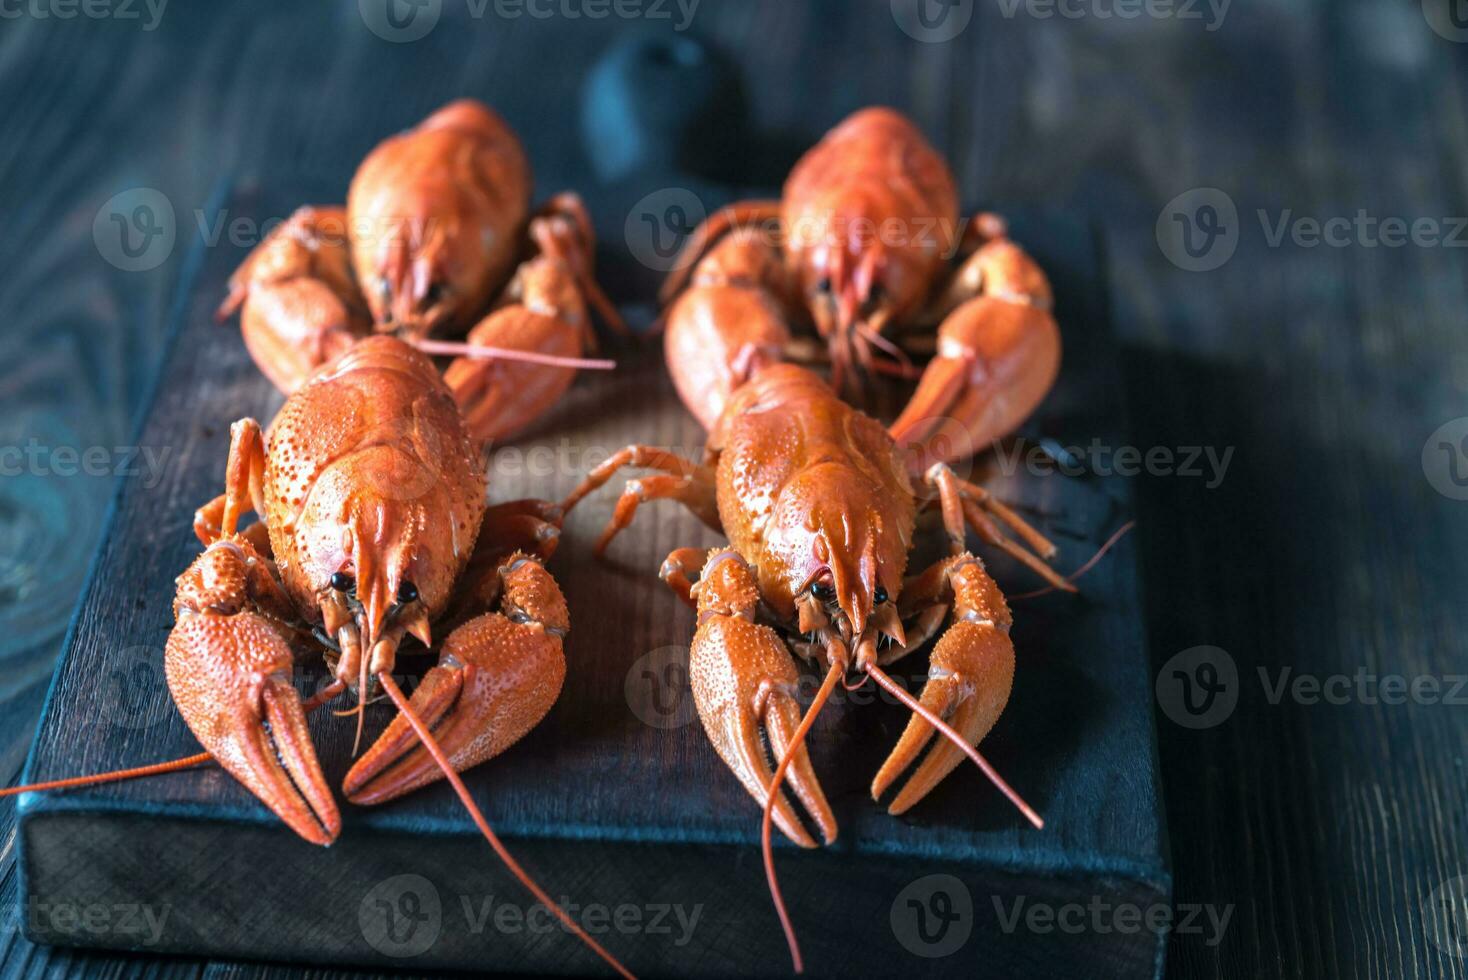 Boiled crayfish on the wooden board photo